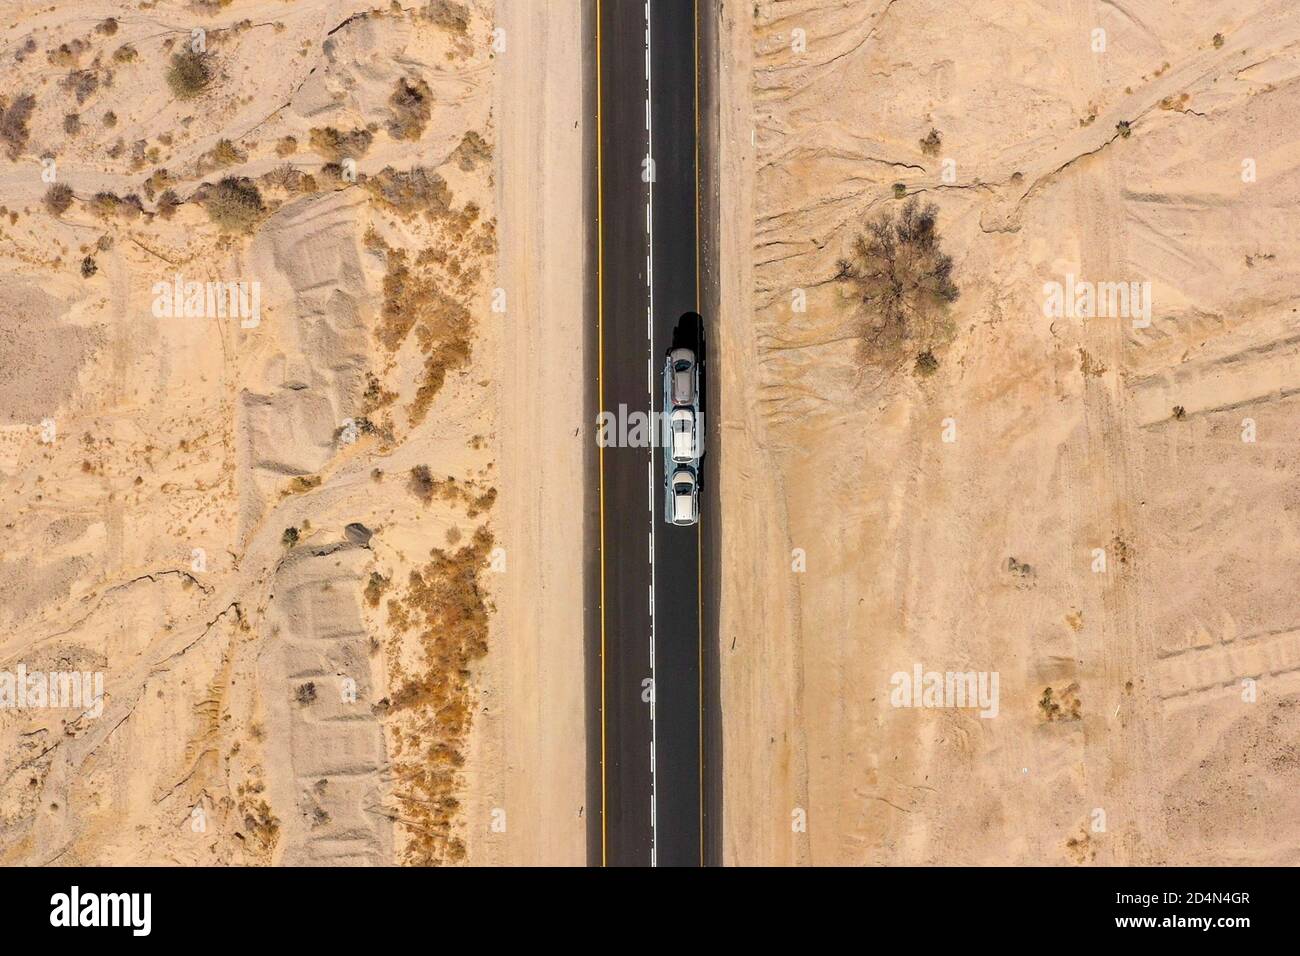 Car Carrier truck heading north on a Desert road, Aerial image. Stock Photo